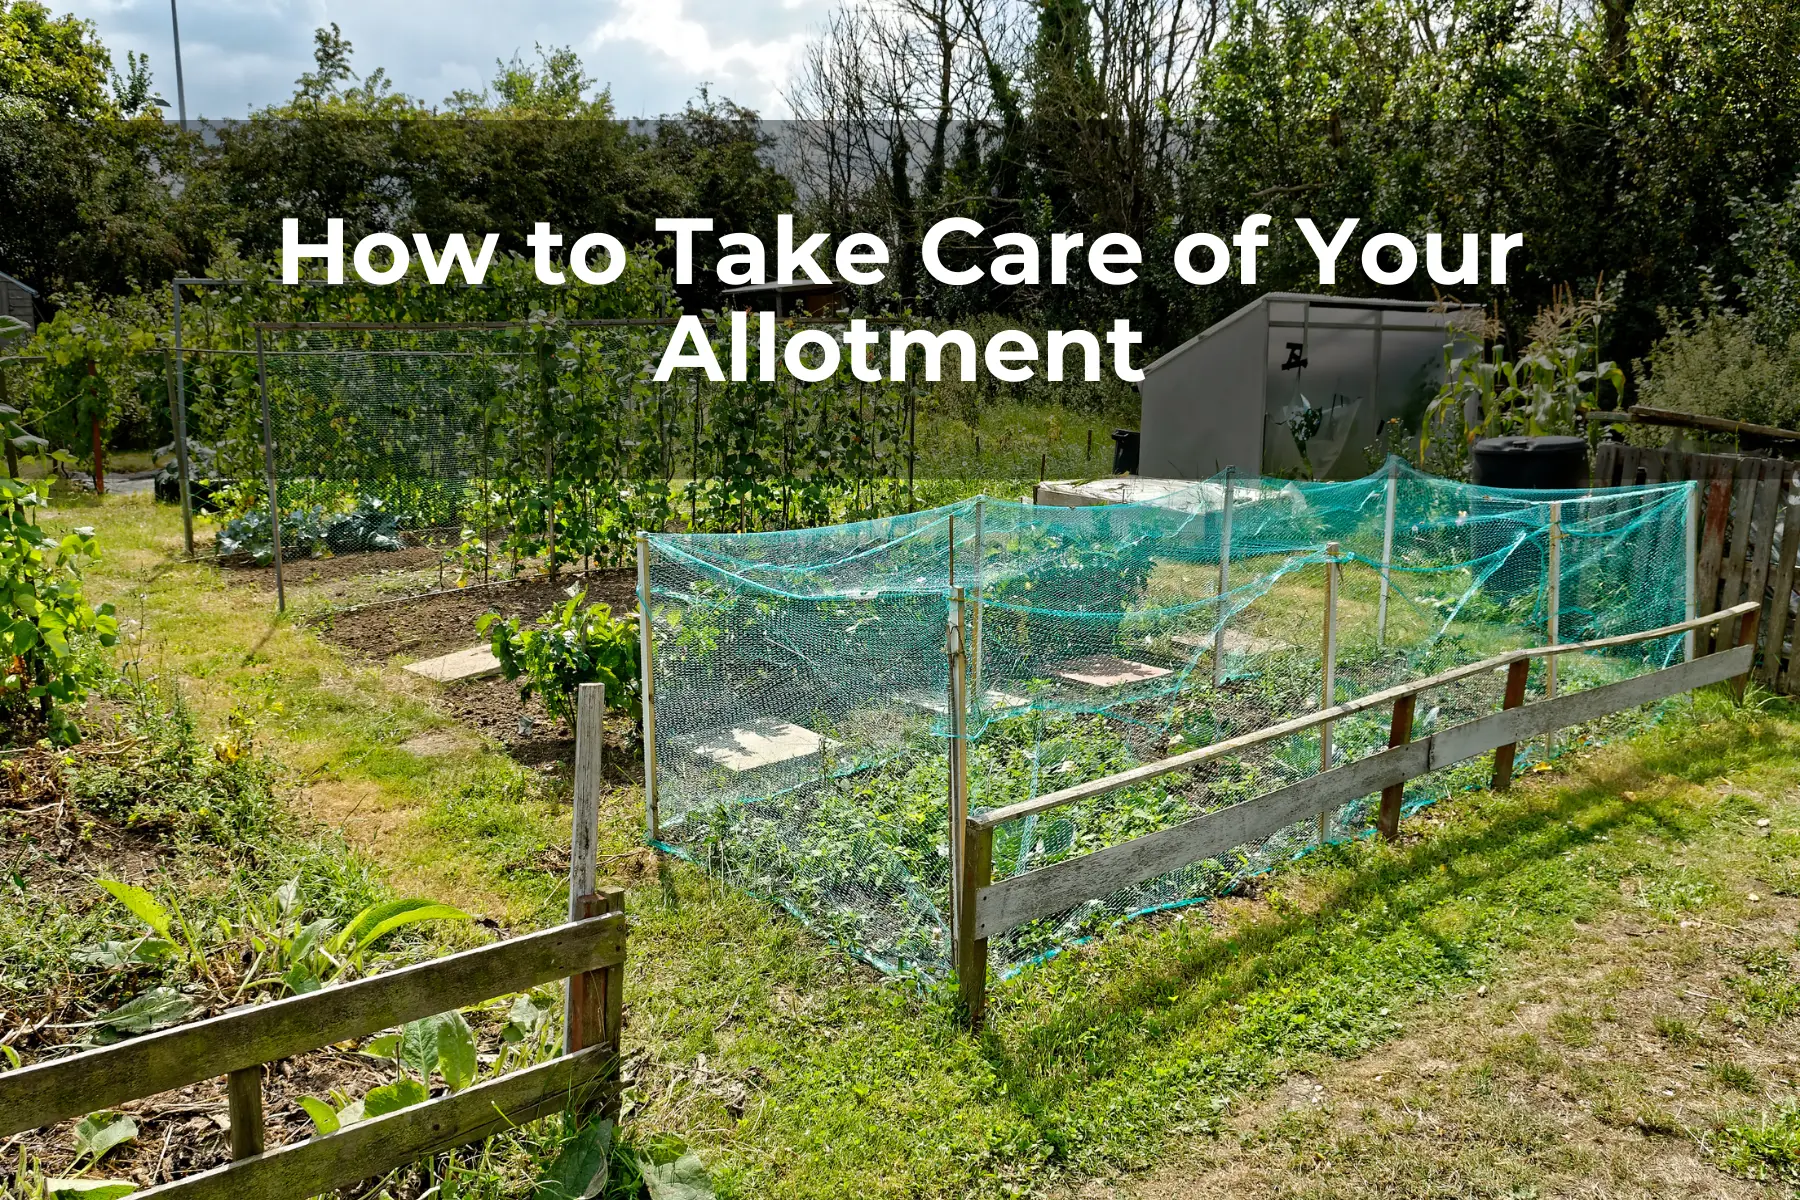 How to Take Care of Your Allotment